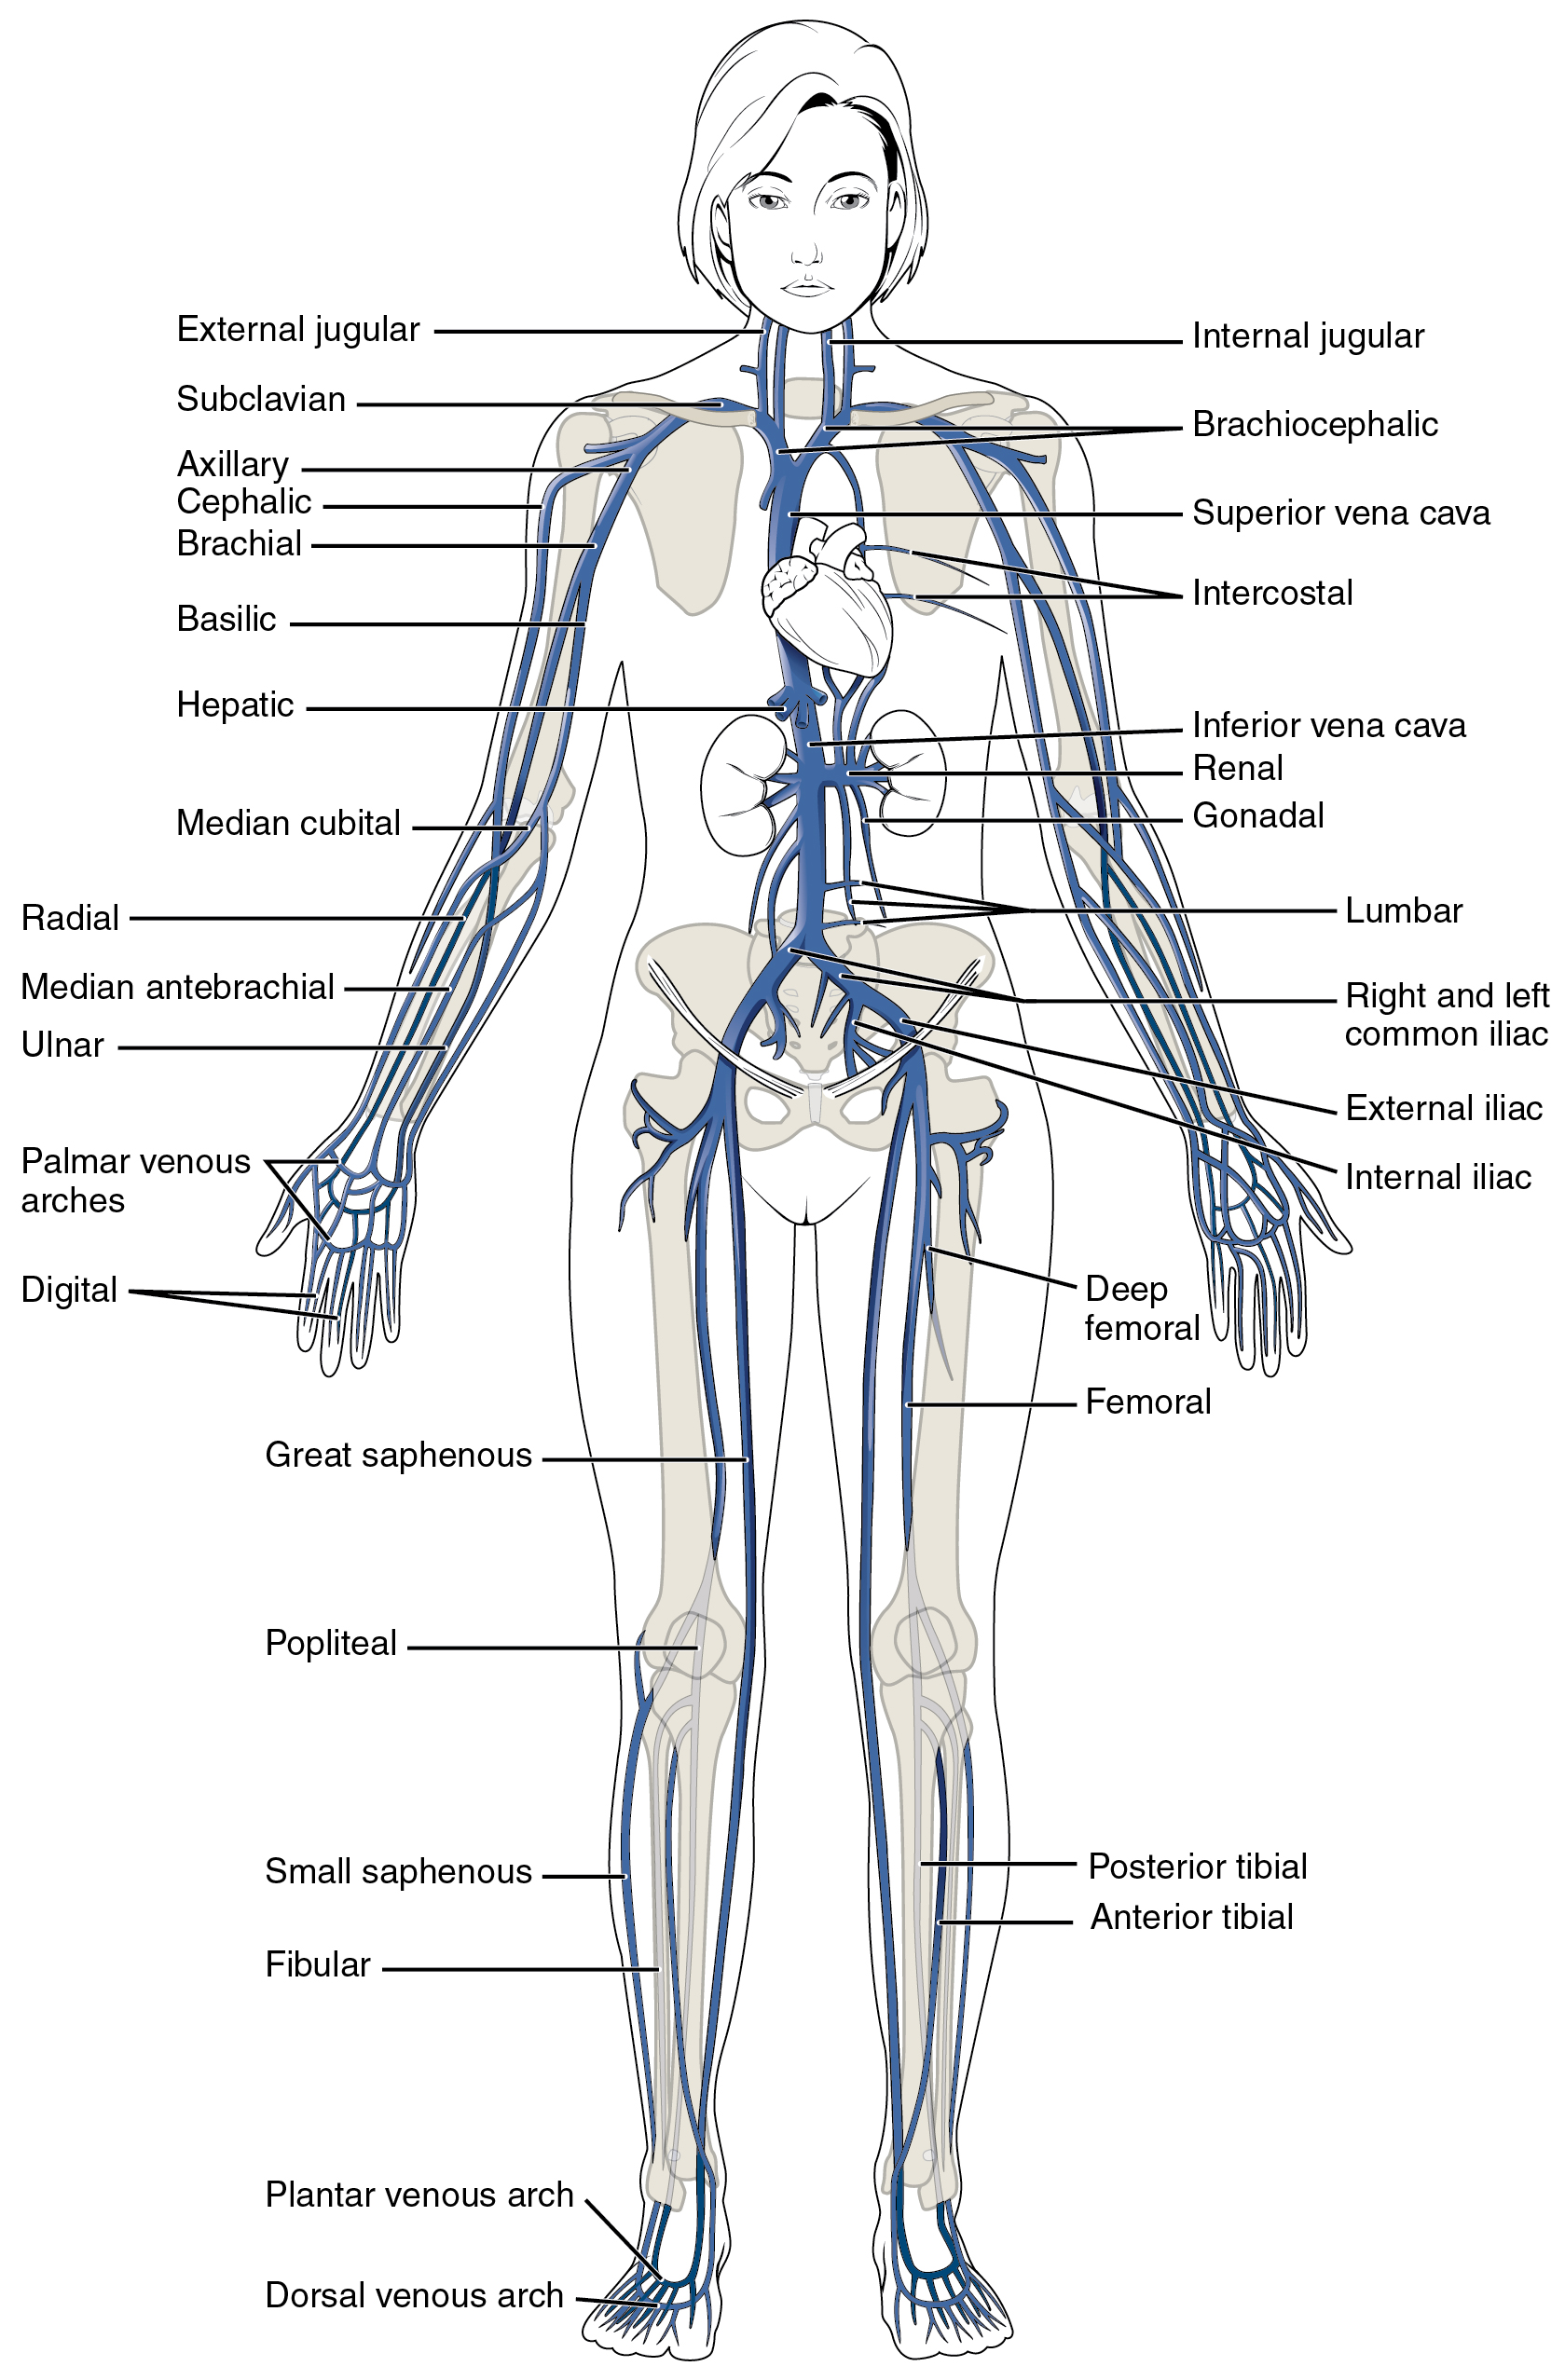 Major Systemic Veins of the Body